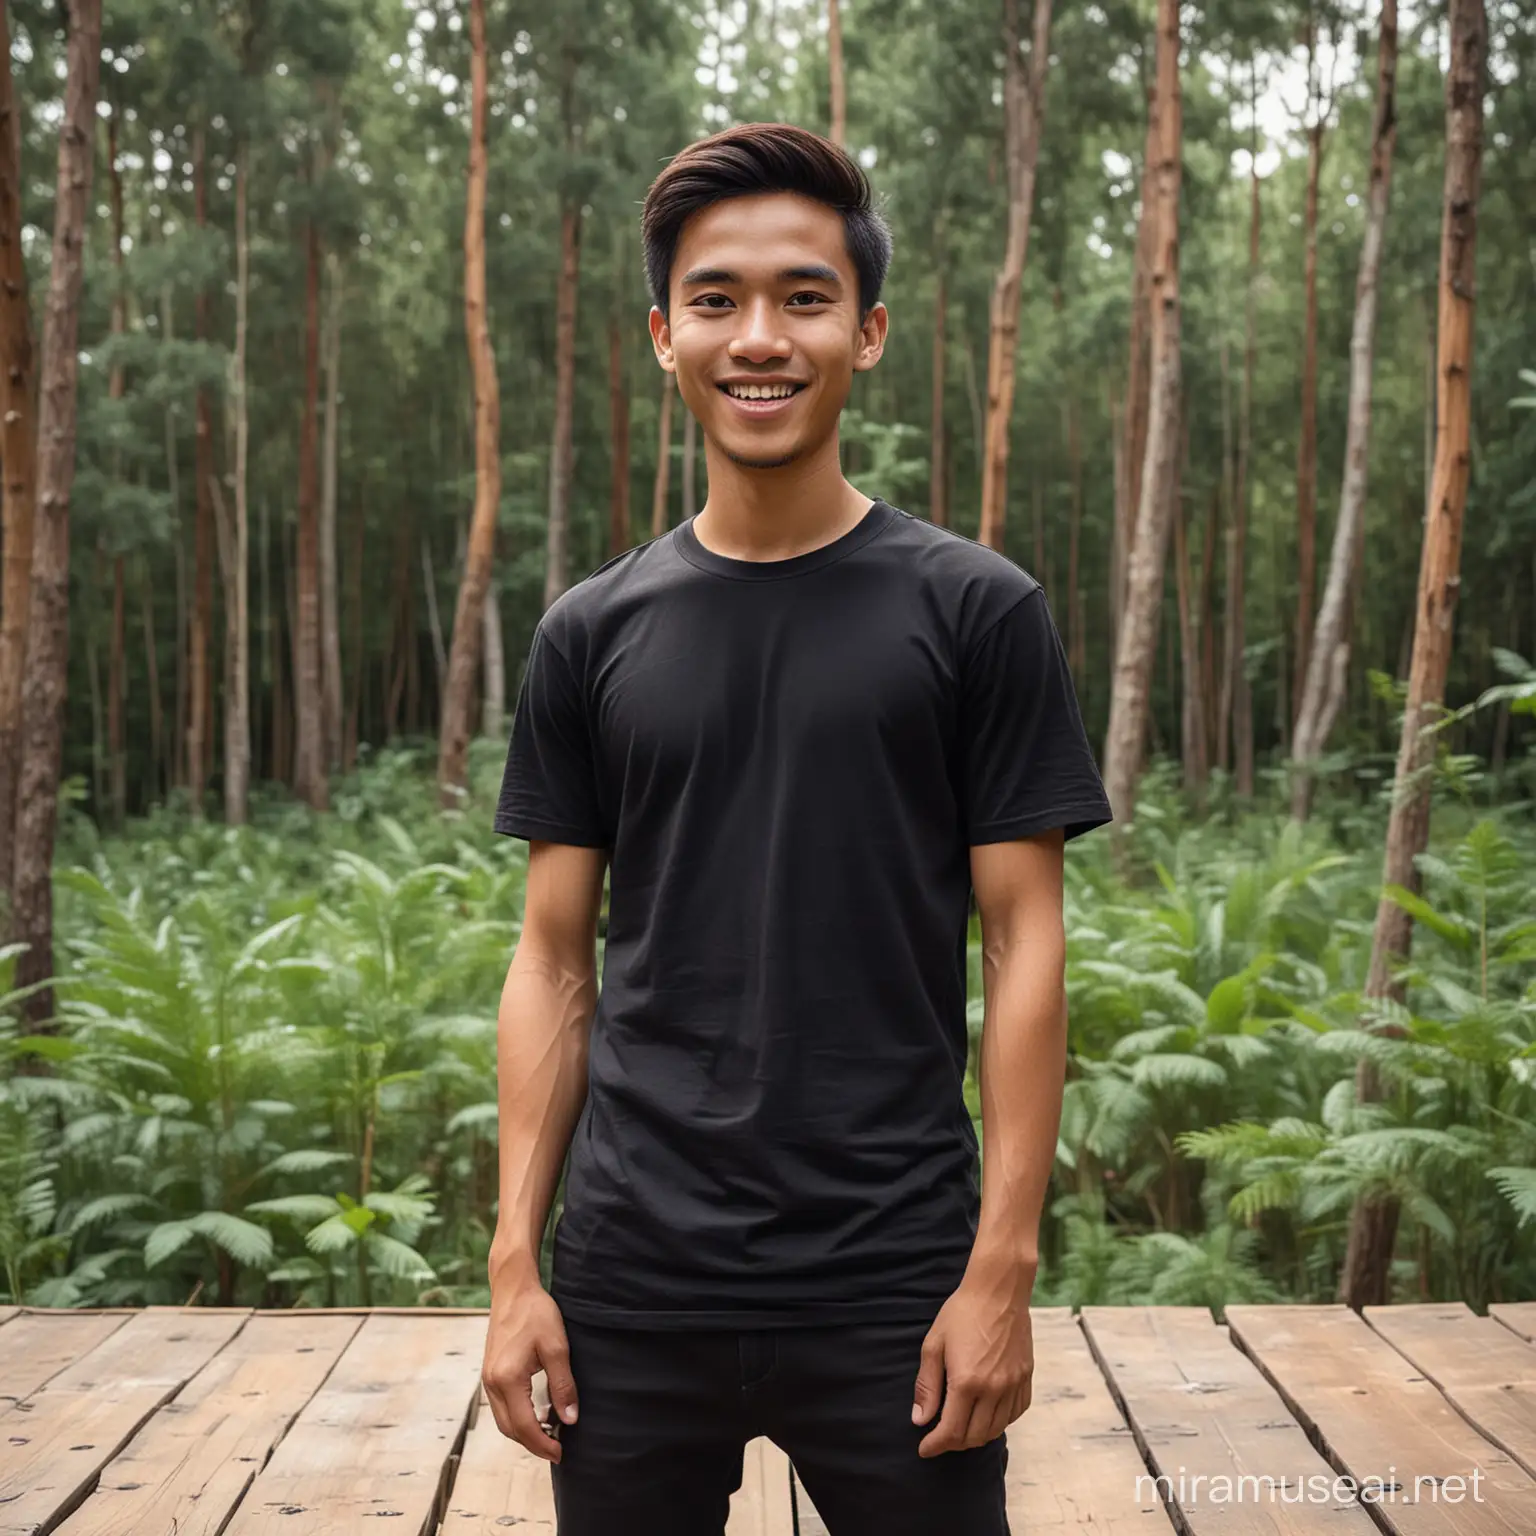 make a picture of a 22 handsome year old man with an Indonesian face standing on a wooden deck, a happy child, a man in black, wearing a black t-shirt, forest in the background, richard sigamani, full shot (fs), distant spaceship in the background, daniel, in front of white back, pine trees in the background, eng kilian, lower quality, forest in the background, sincere smile 4 k image quality